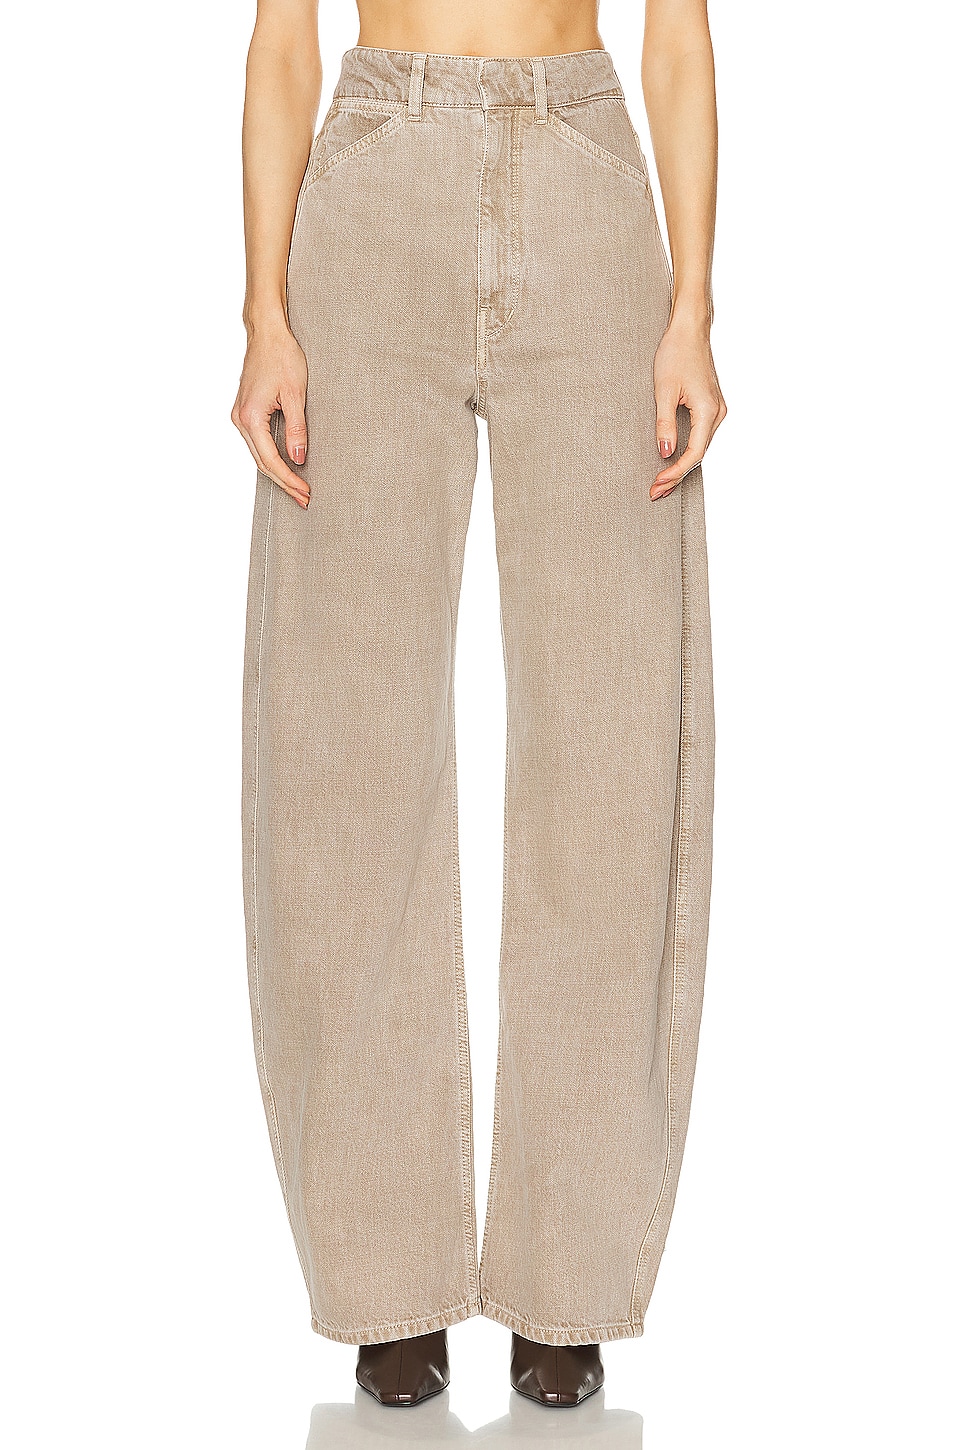 Image 1 of Lemaire High Waisted Curved Wide Leg in Denim Snow Beige